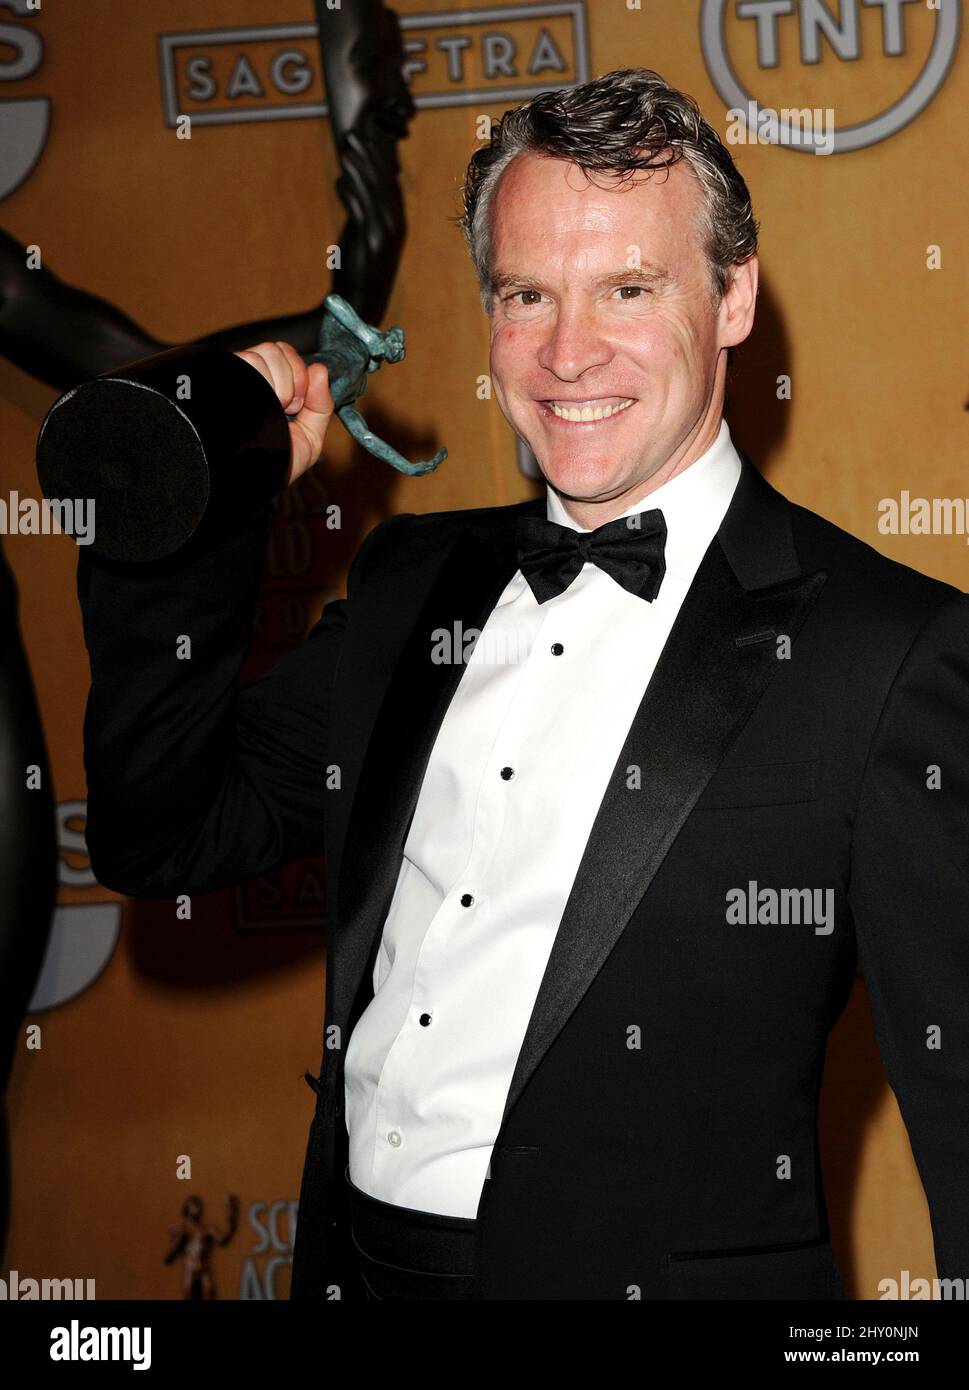 Tate Donovan smiles backstage with the award for outstanding cast in a motion picture for '“Argo'” at the 19th Annual Screen Actors Guild Awards. Stock Photo